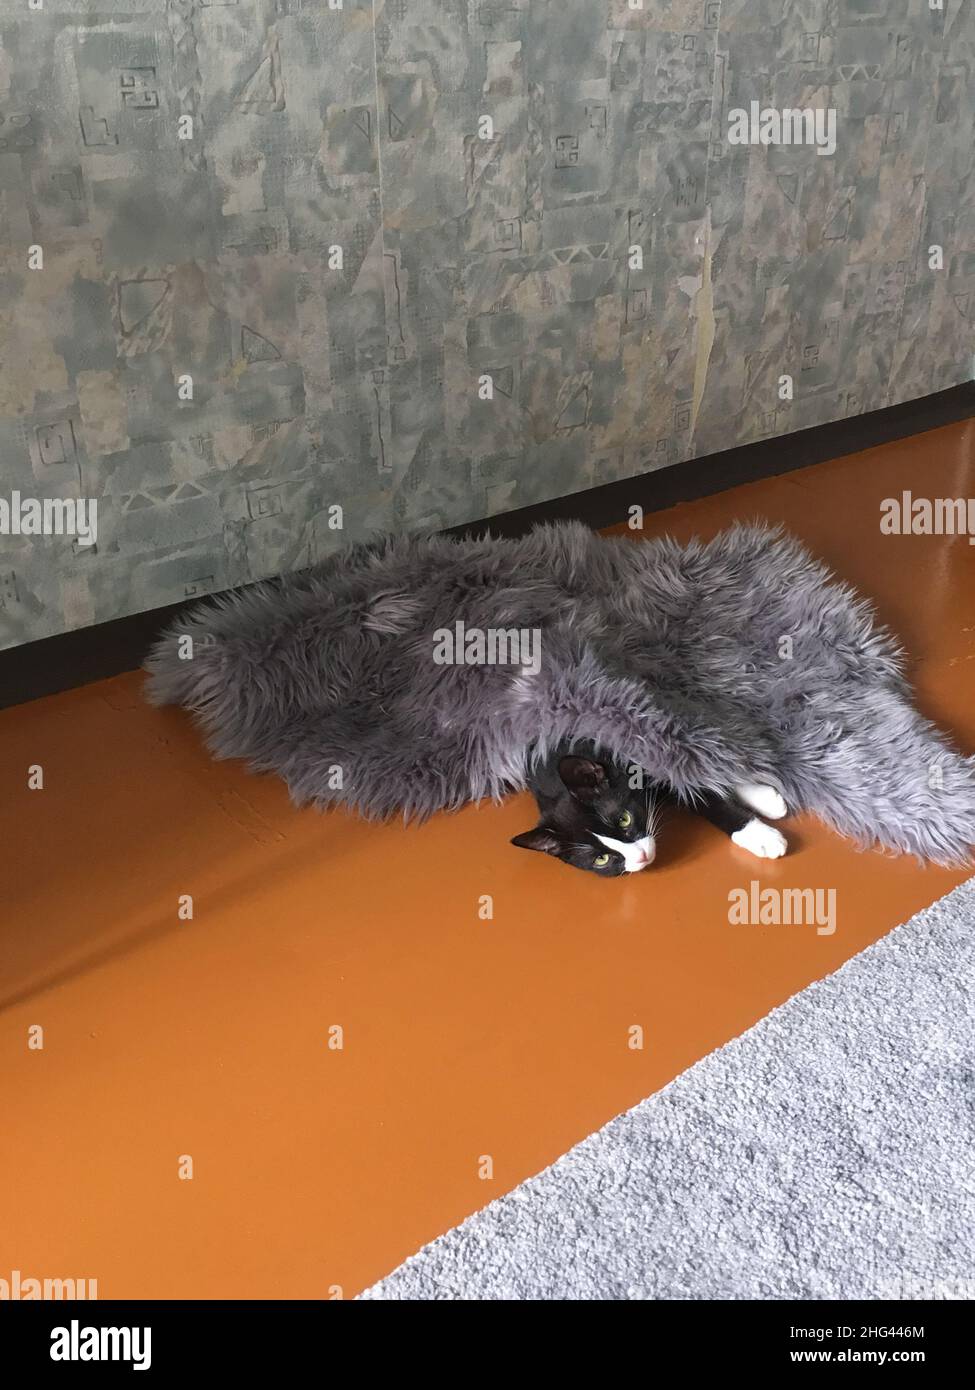 A black cat sleeps on a brown floor under a gray fluffy blanket in the spring sun. Stock Photo